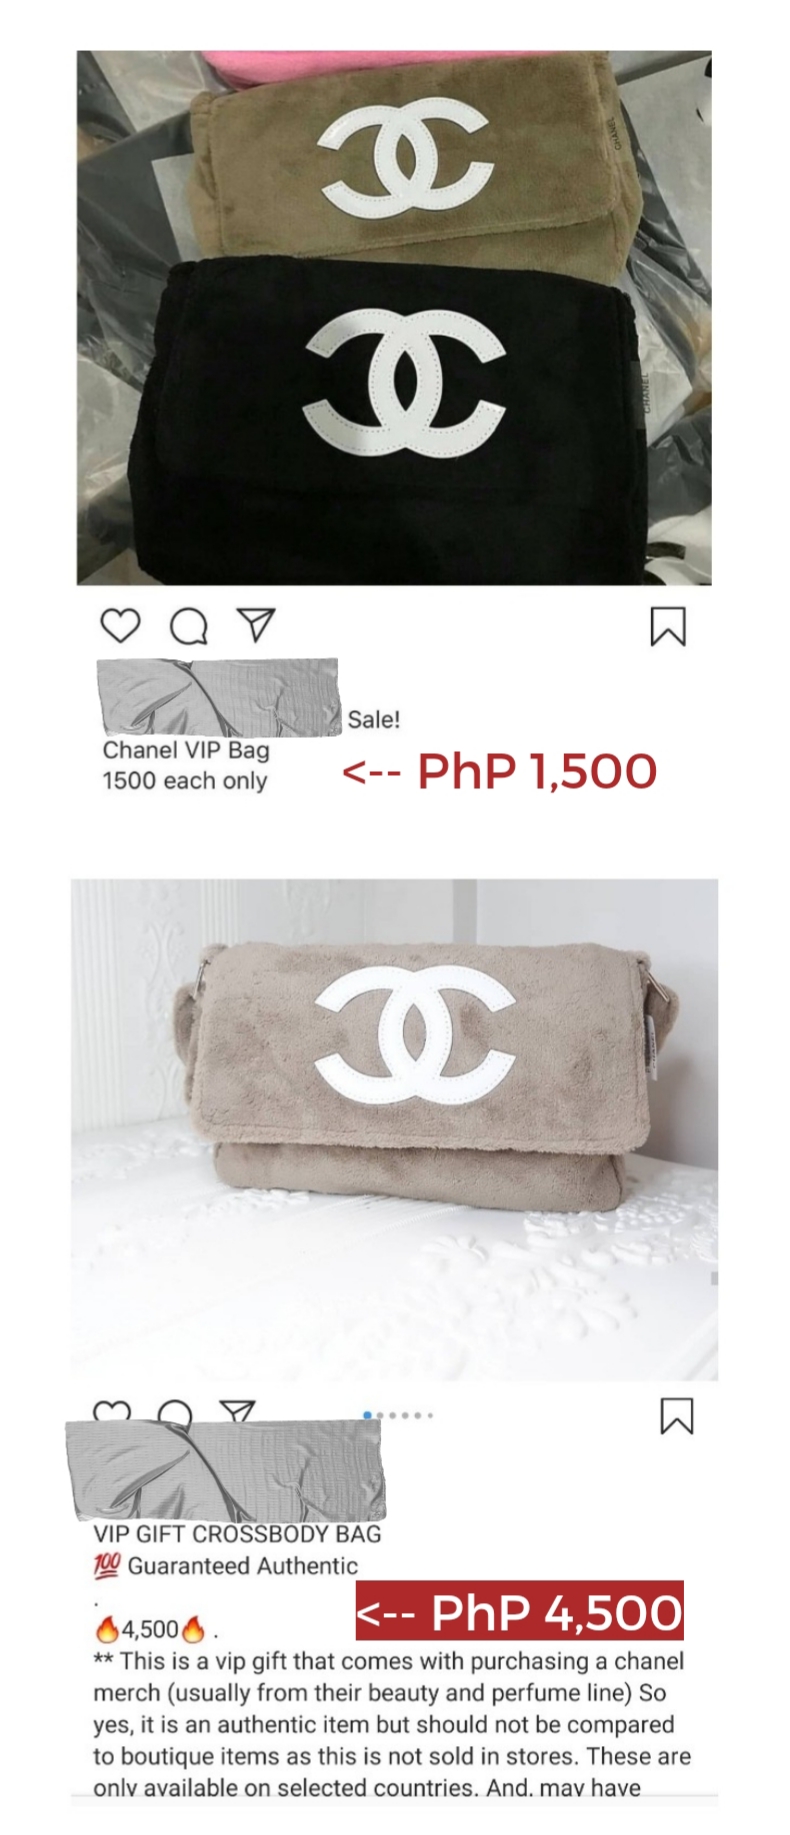 are chanel bags real leather